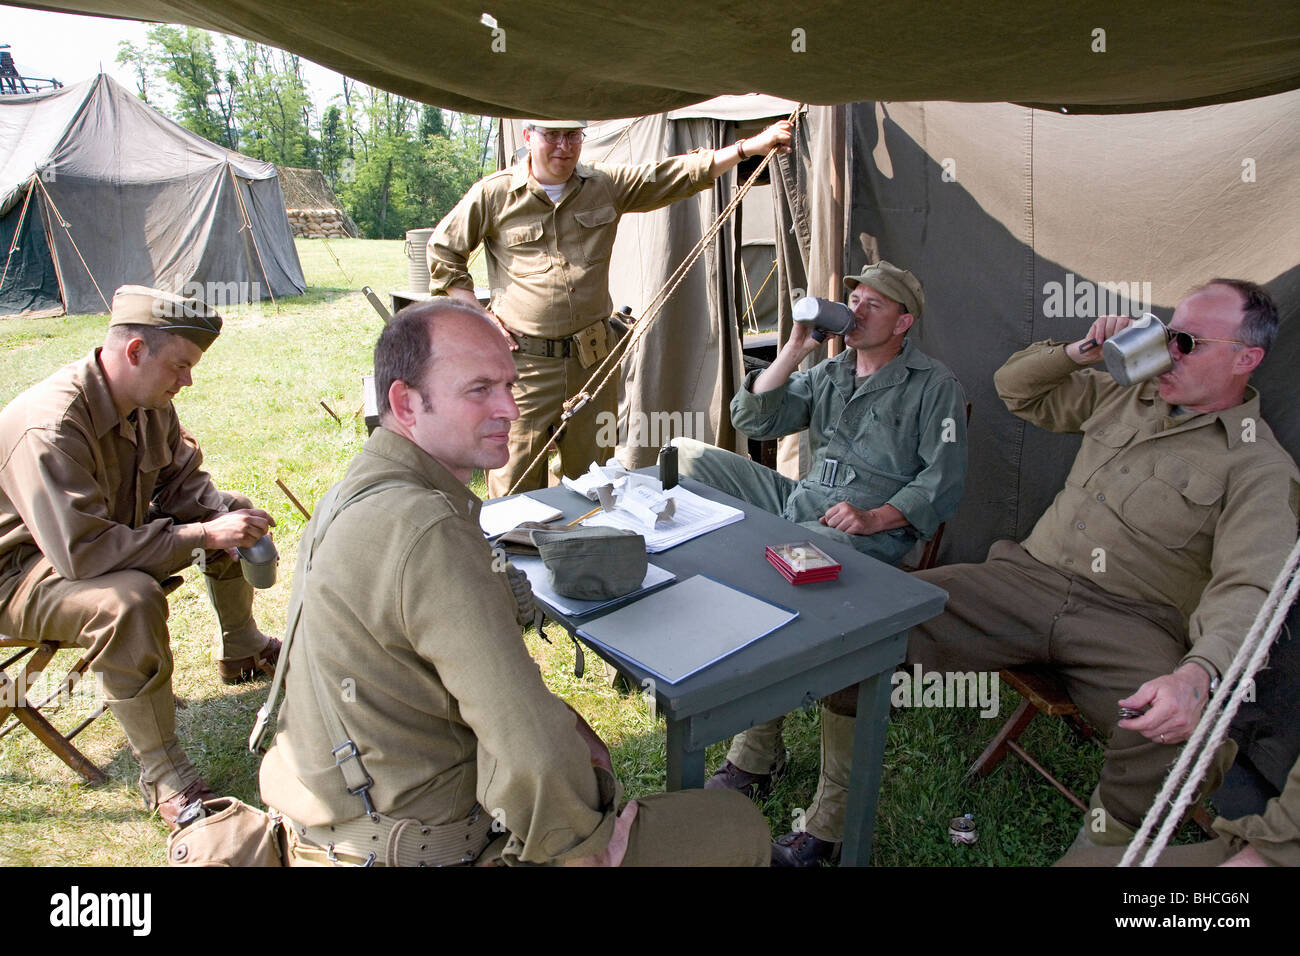 Soldiers relax in front of tent, at Mid-Atlantic Air Museum World War II Weekend and Reenactment in Reading, PA Stock Photo